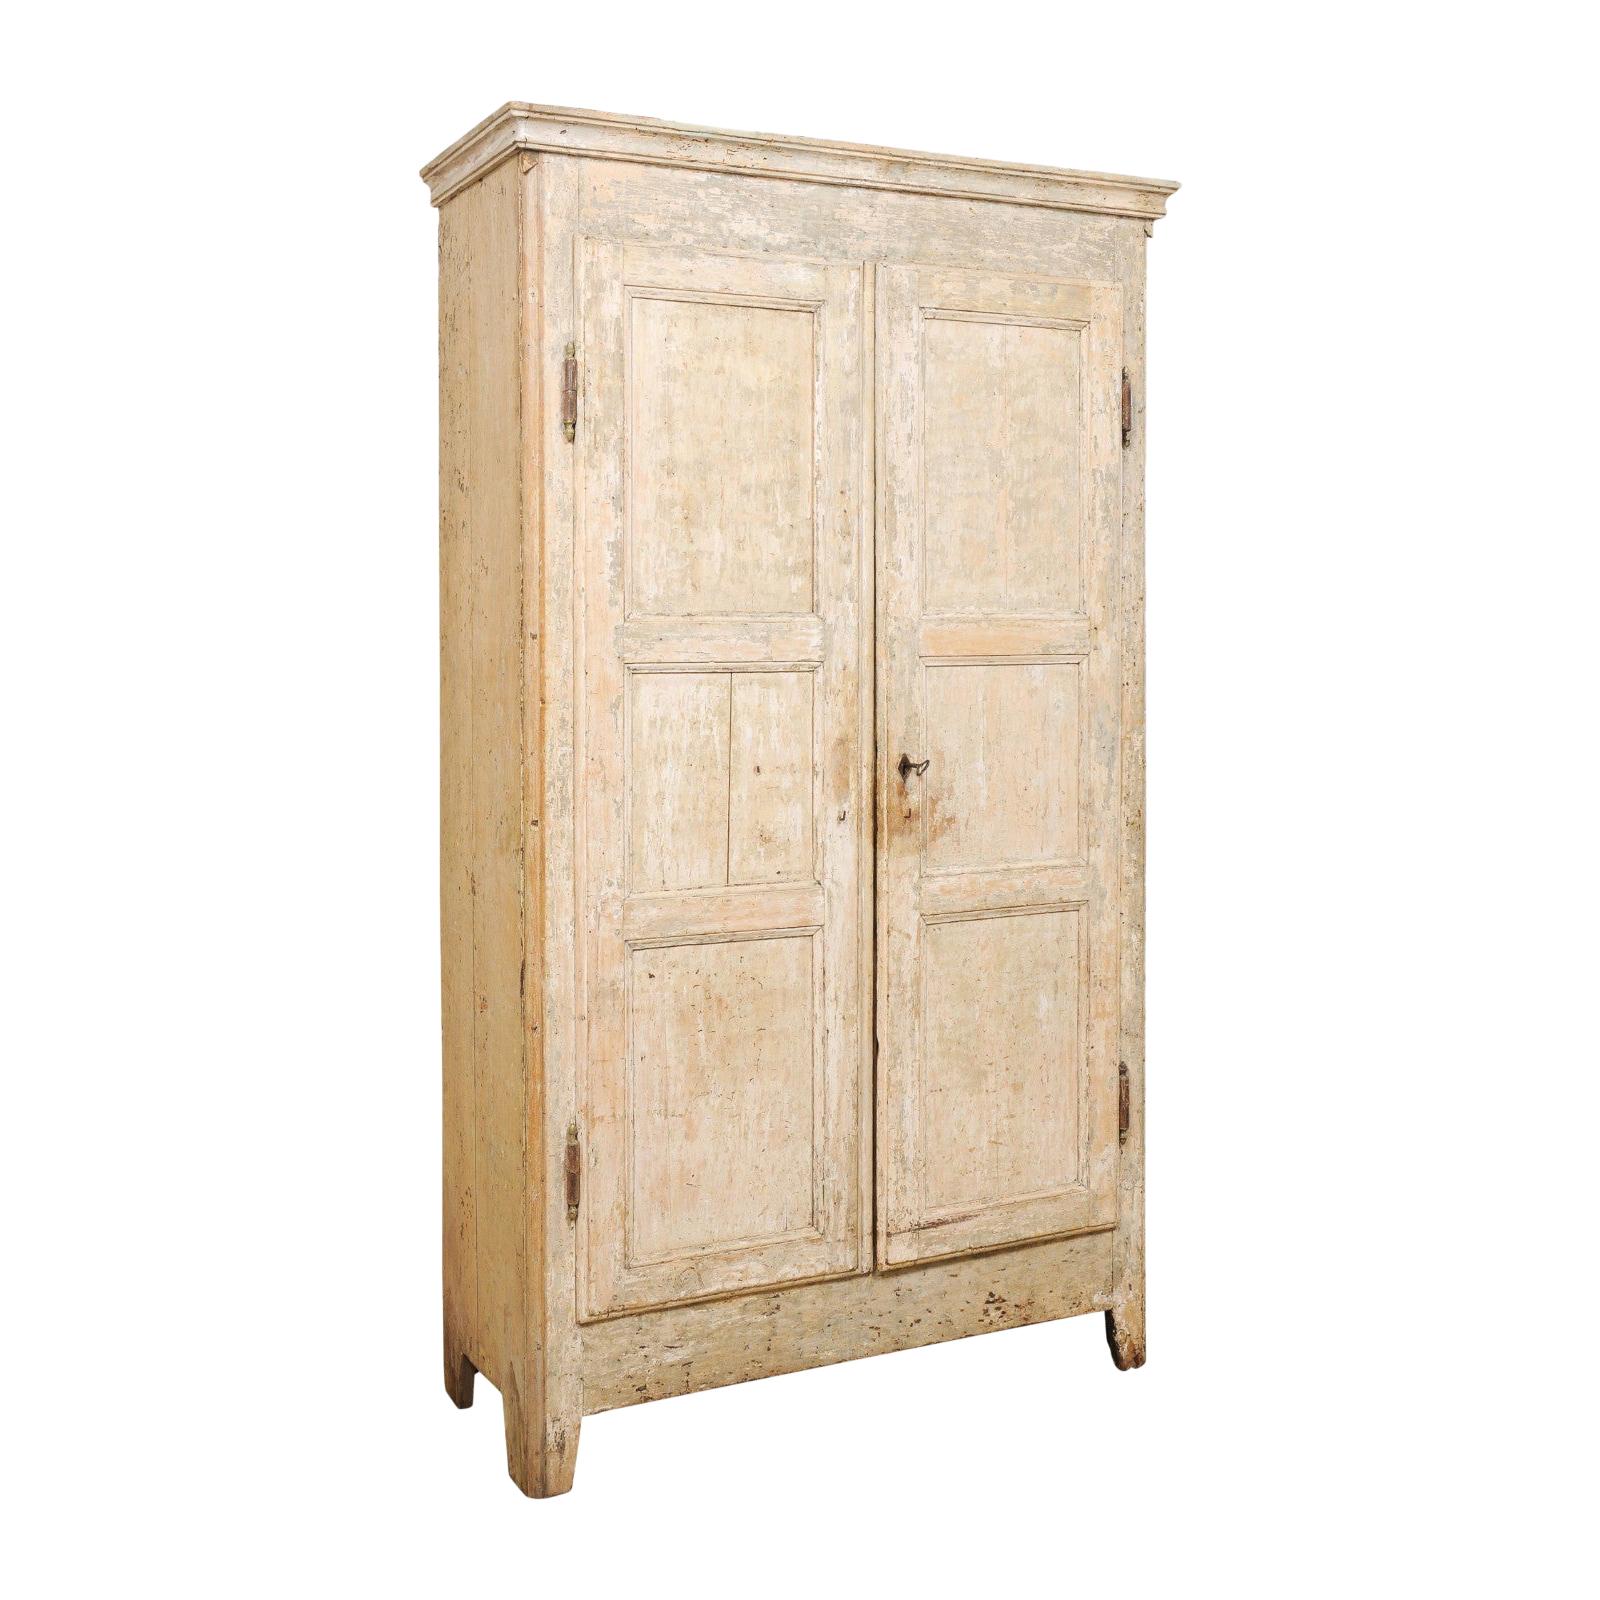 19th Century Two-Door Armoire from the South of France